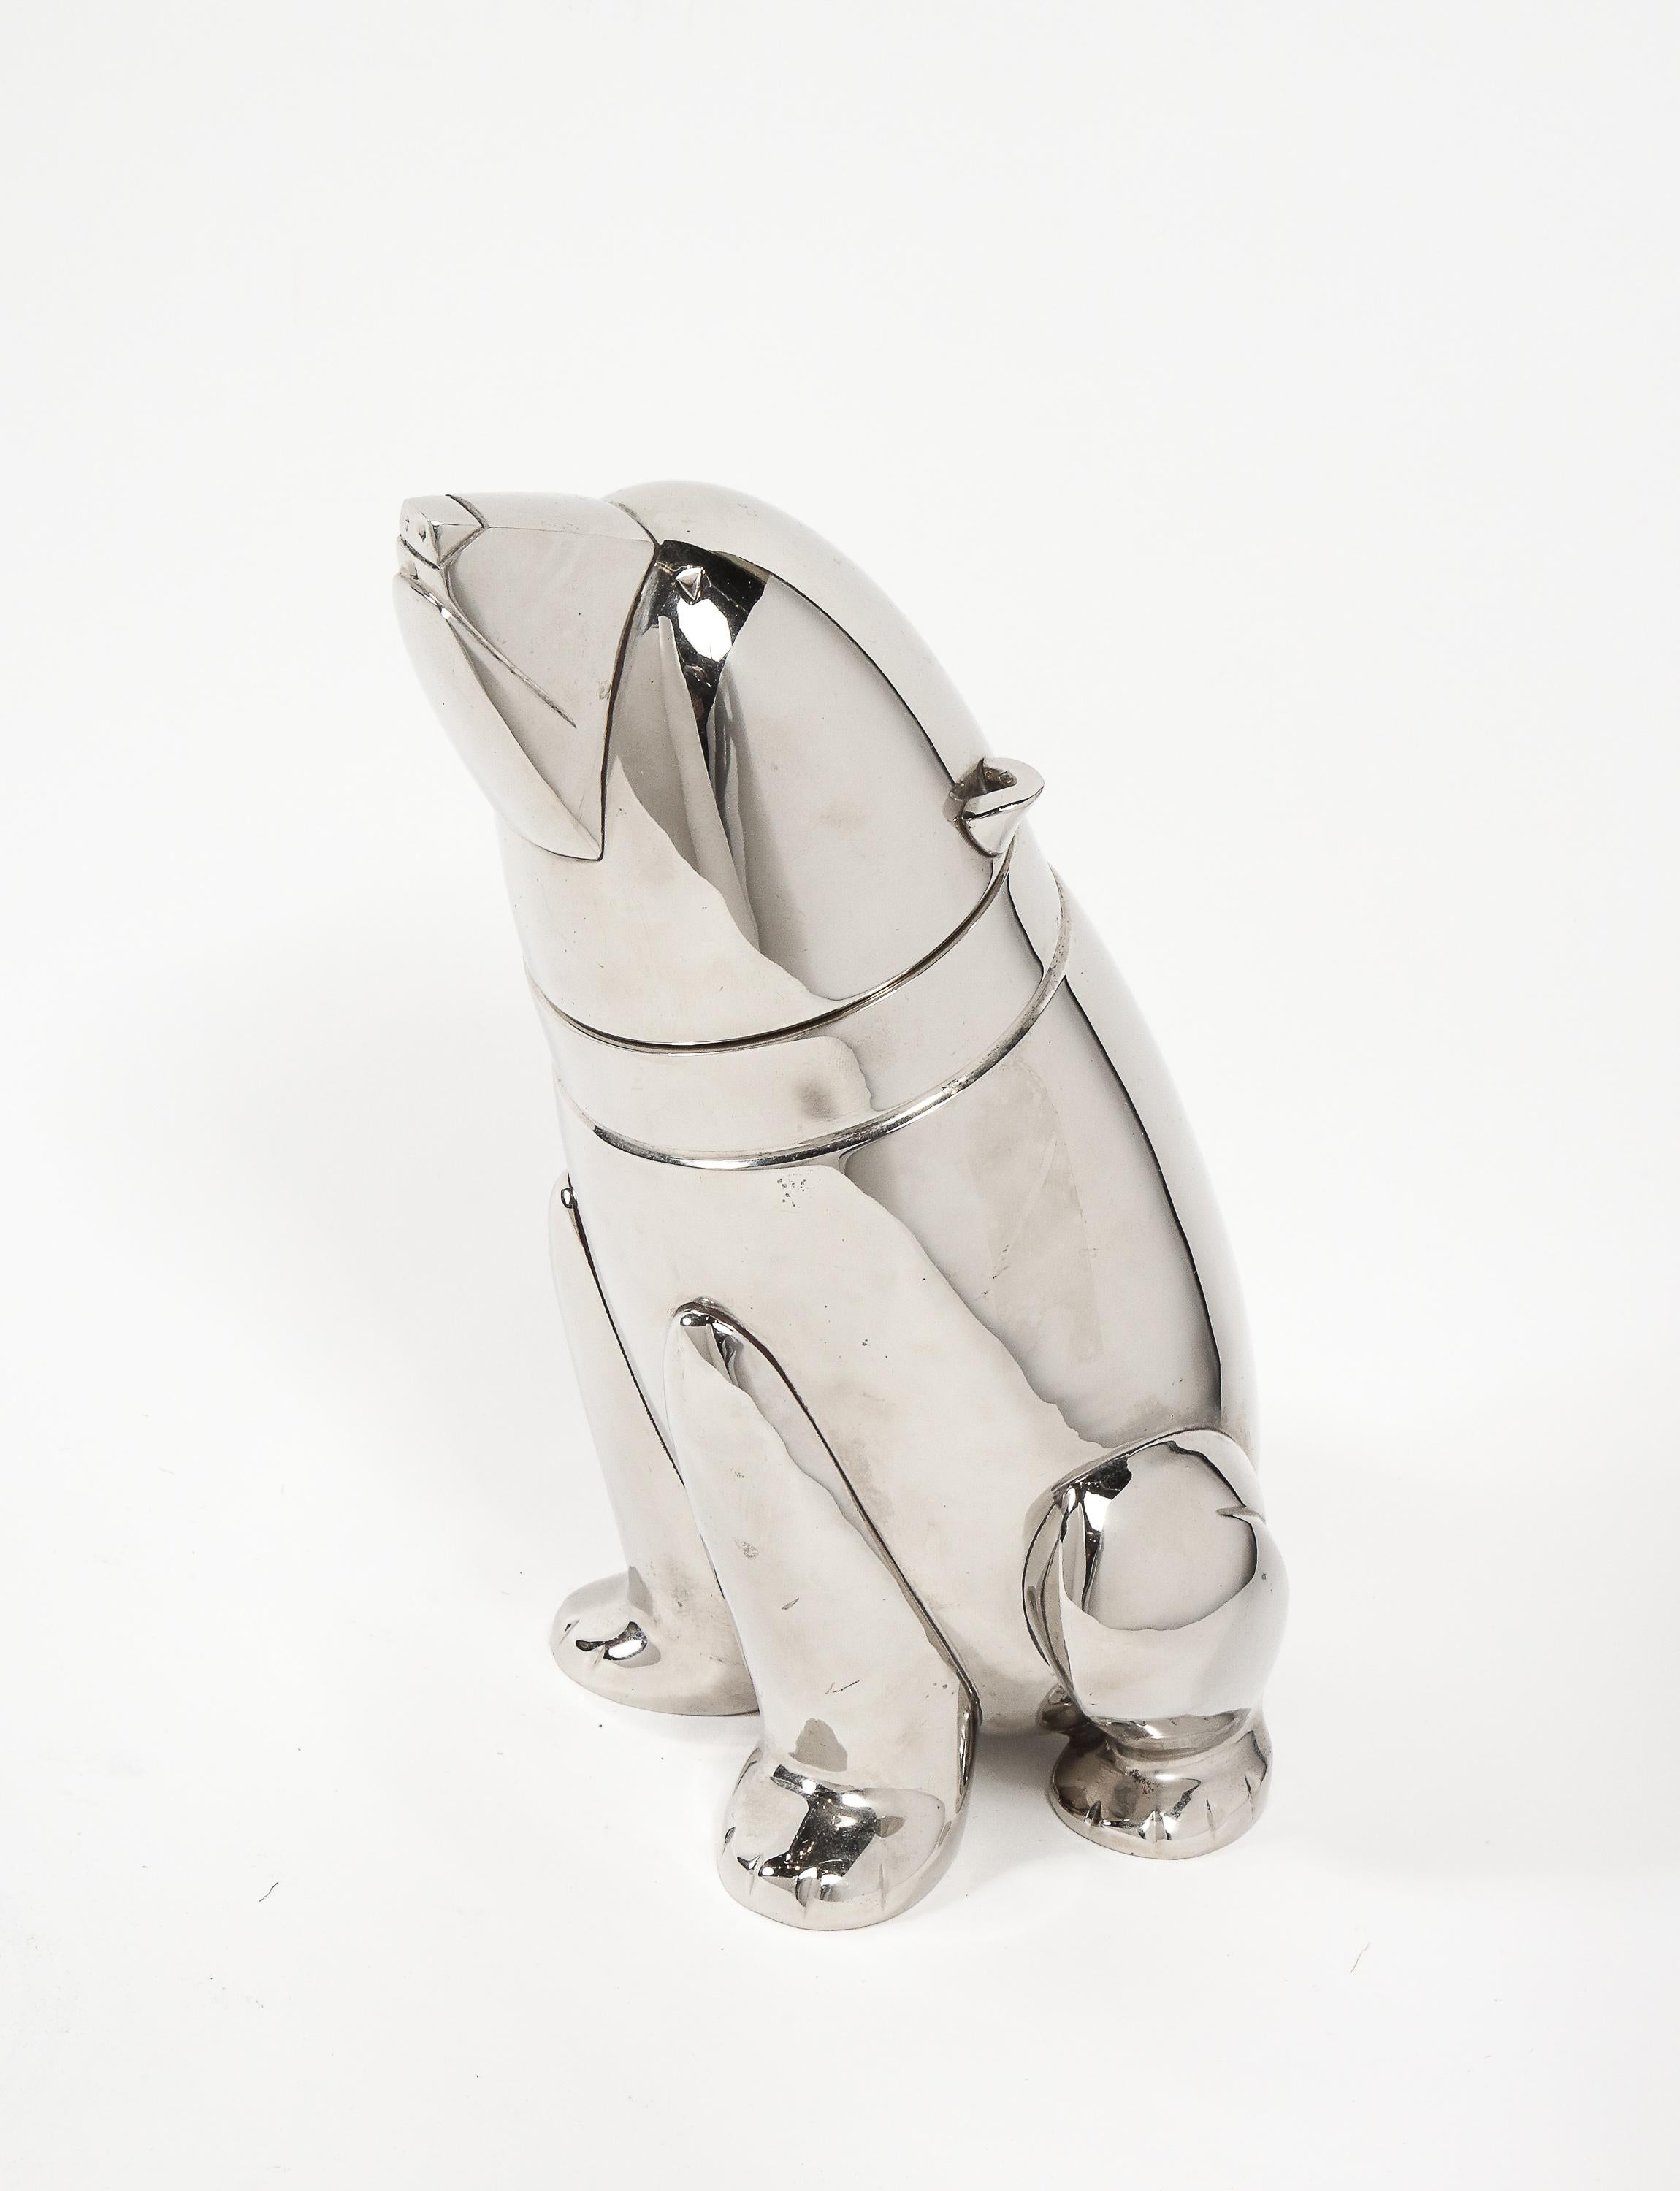 Vintage silver plated cocktail Shaker in the form of a polar bear

'Polar Bear' cocktail Shaker,

circa 1930s.

A very heavy gauge, silver plated cocktail Shaker in the form of a polar bear, the head removing to reveal the strainer.

Good